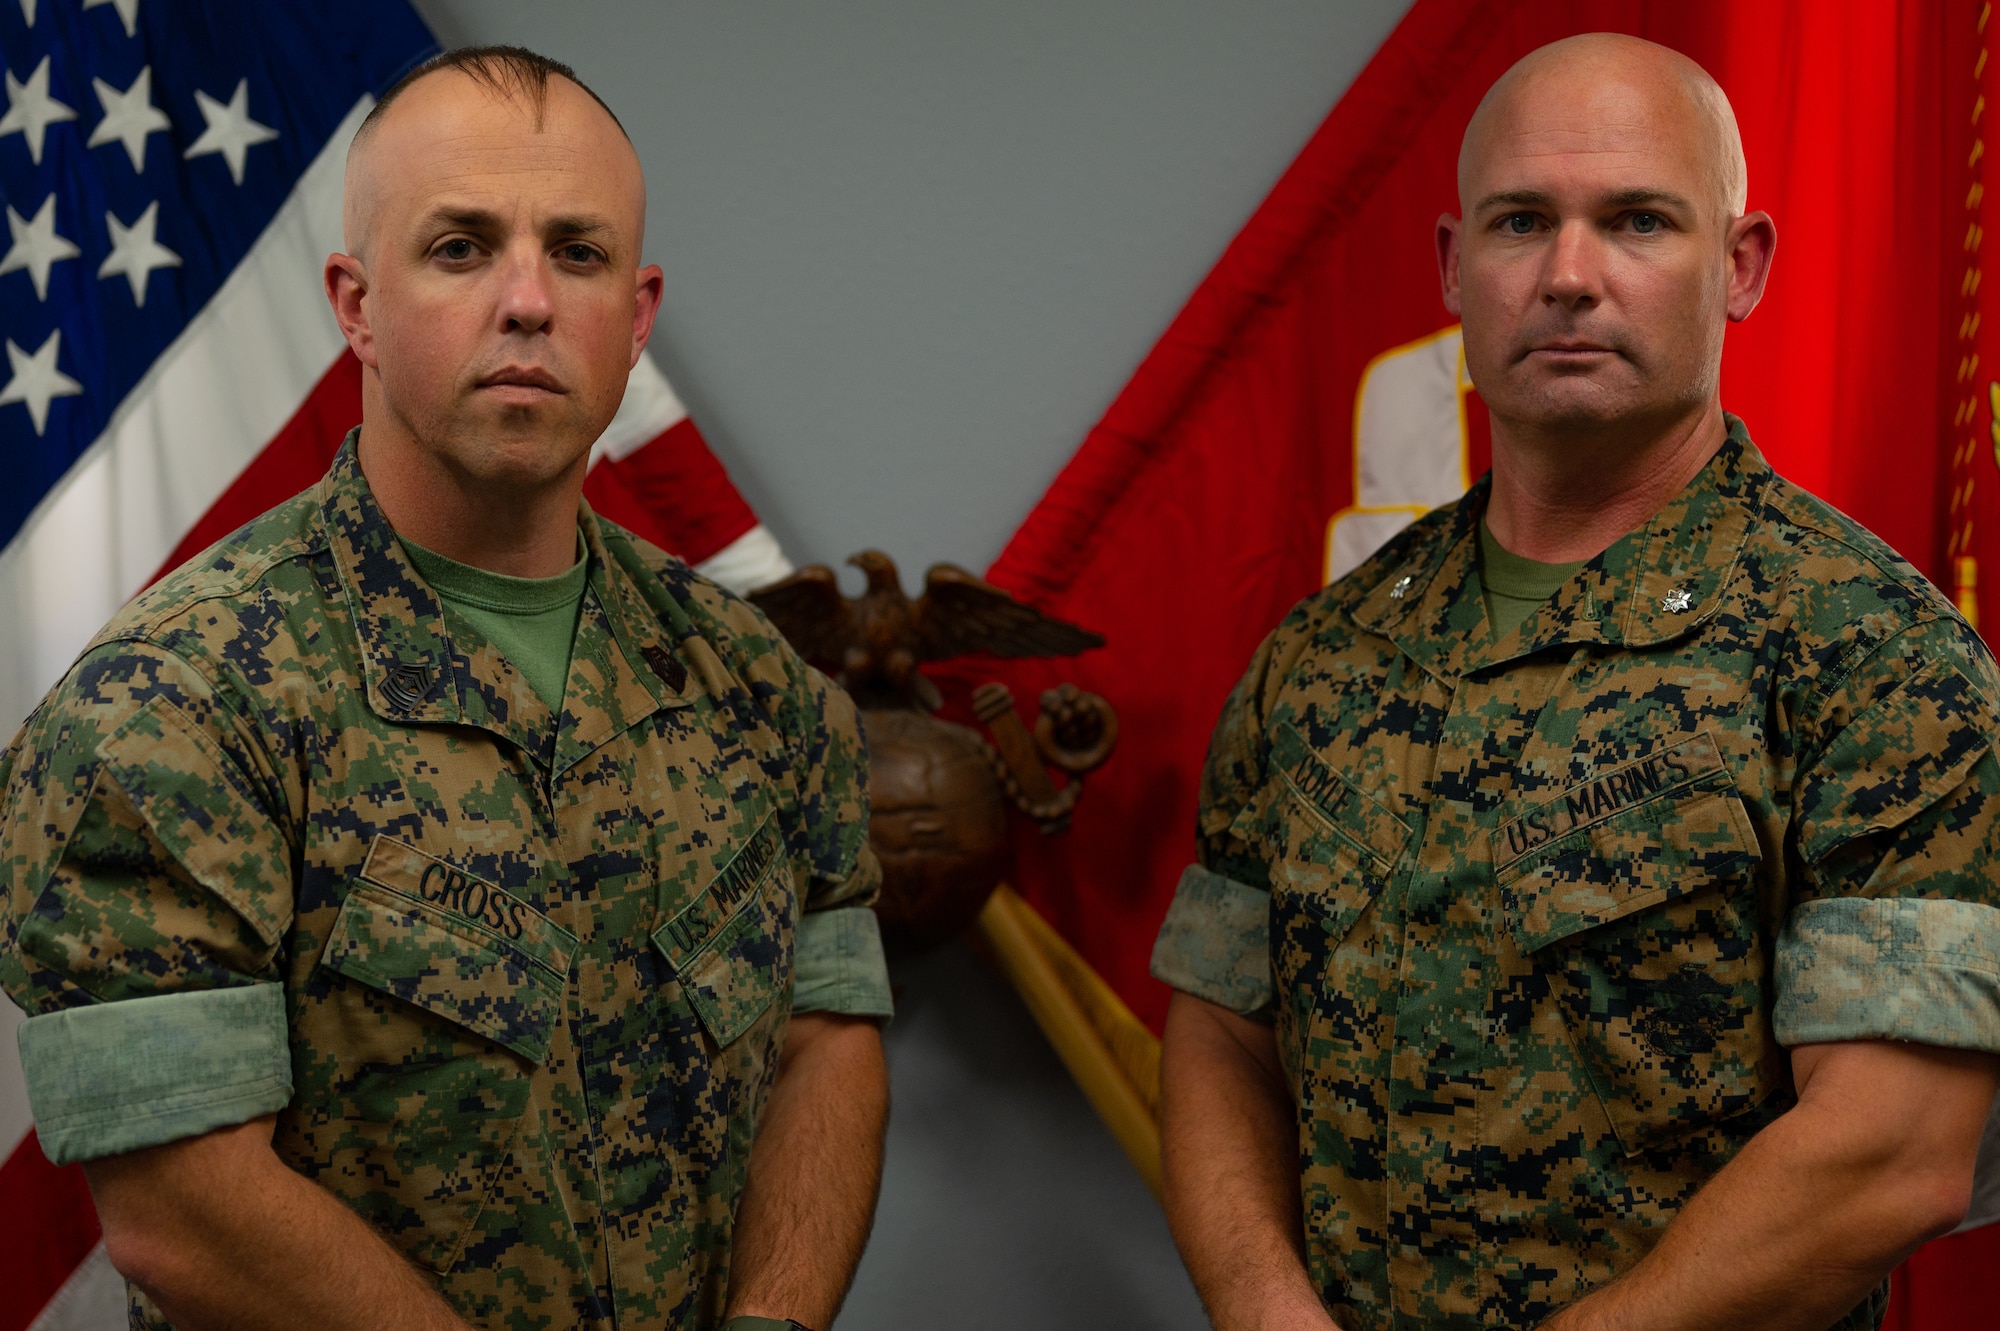 U.S. Marine Corps Master Gunnery Sgt. Darry Cross, Marine Corps Detachment Goodfellow senior enlisted advisor, and Lt. Col. Thomas Coyle, MCD Goodfellow commander, pose for a photo together in front of the U.S. and USMC flags, Goodfellow Air Force Base, Texas, August 1, 2022. The command team will lead the development of both students and staff, and proactively seek out opportunities to improve and optimize MCD Goodfellow training and instruction to maximize the quality of Marines they graduate to the fleet and supporting establishment. (U.S. Air Force photo by Senior Airman Michael Bowman)